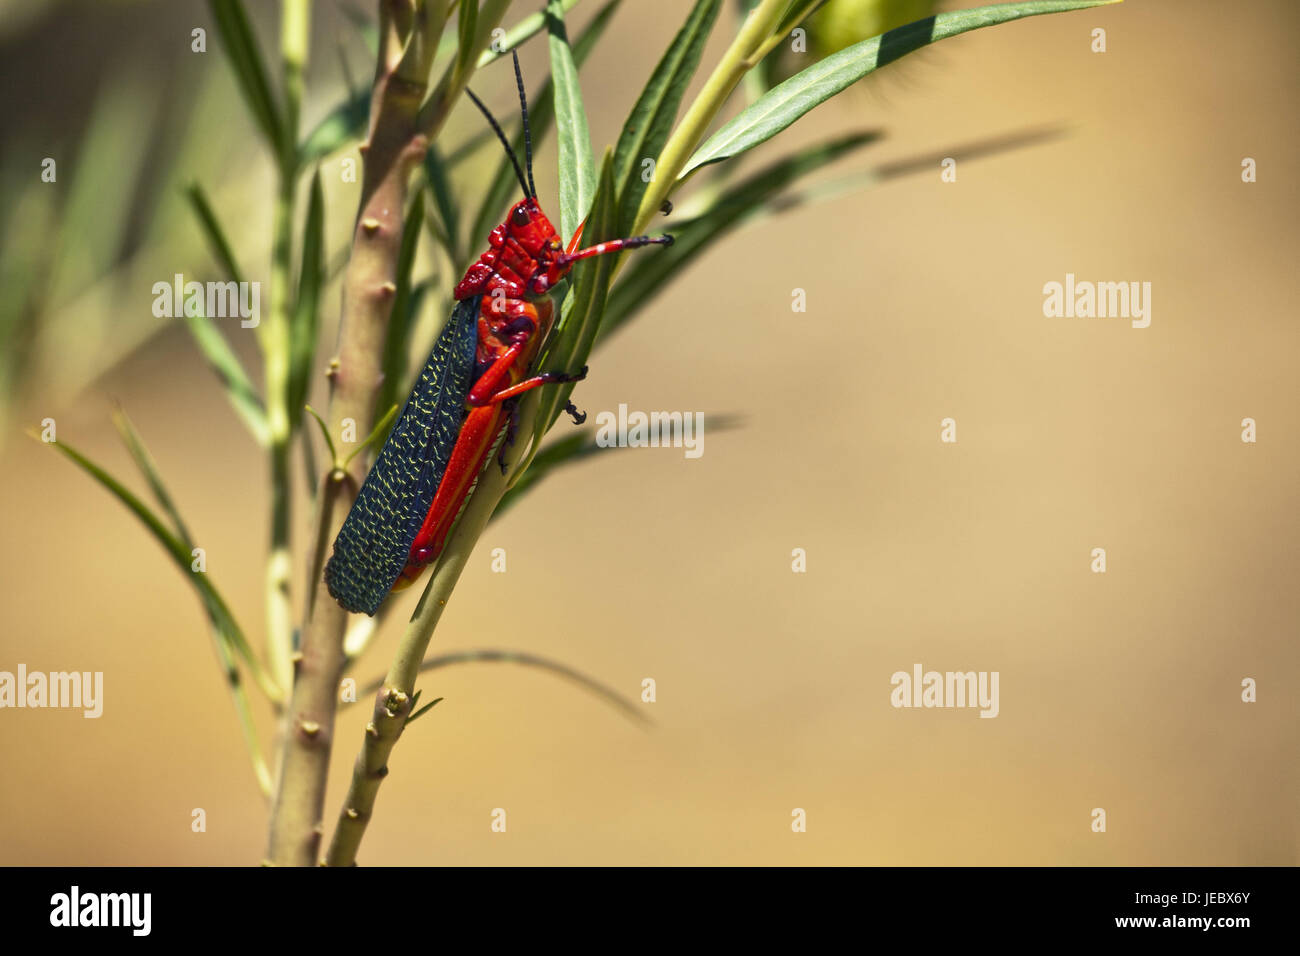 South Africa, Namaqua, blade of grass, insect, sit, frights, insect, frights, colourfully, brightly, conspicuously, able to fly, cone head frights, medium close-up, at the side, Stock Photo